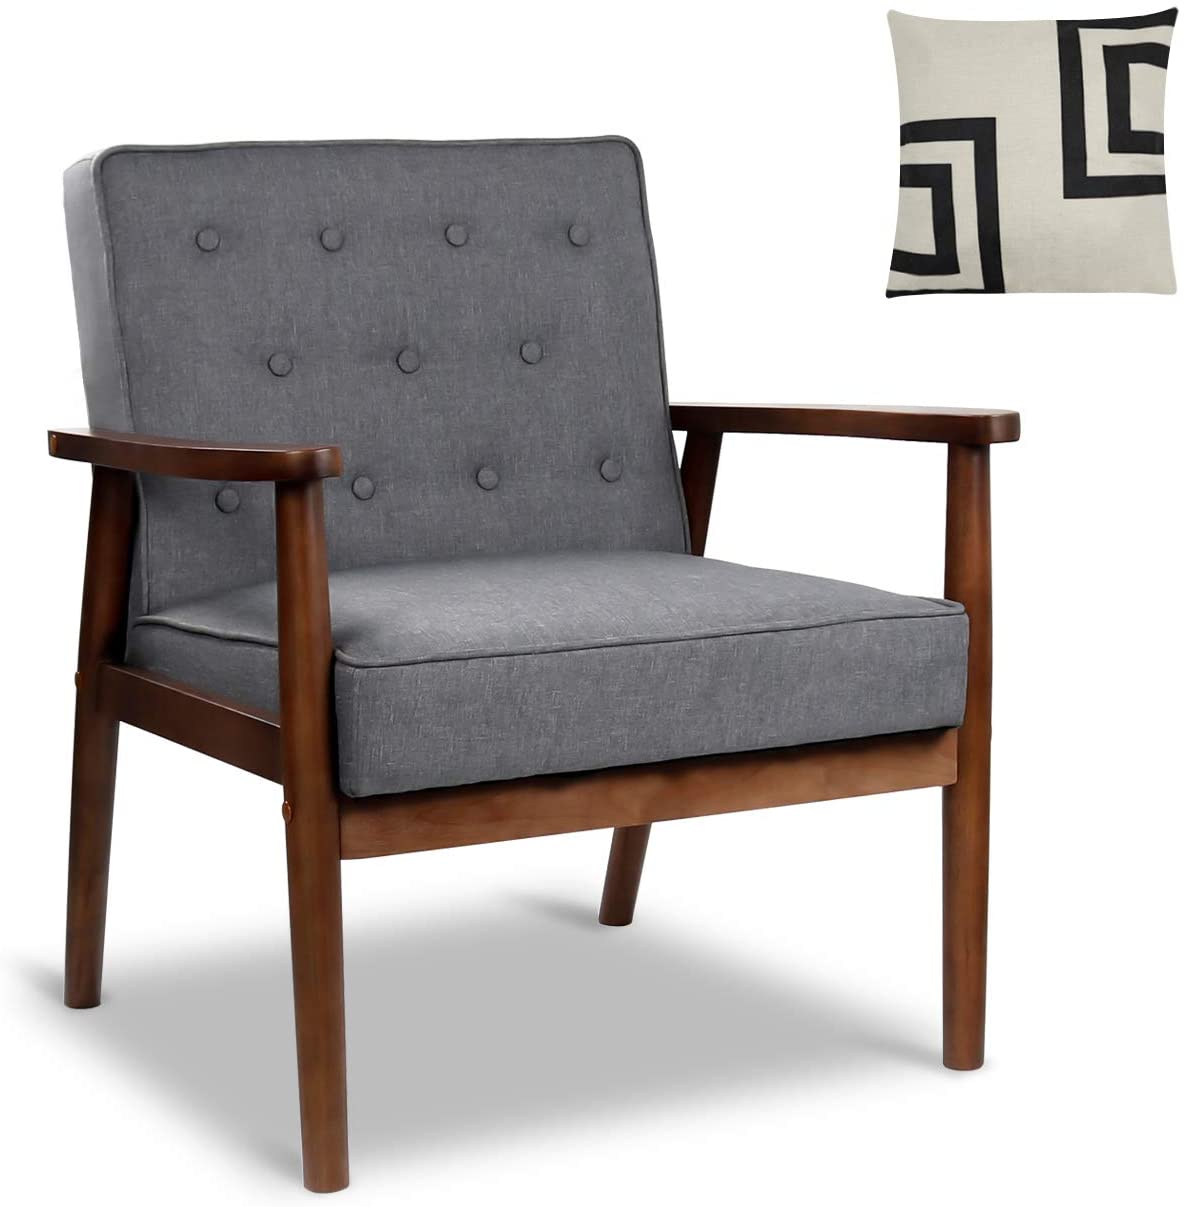 Mid-Century Retro Modern Accent Chair by JIASTING